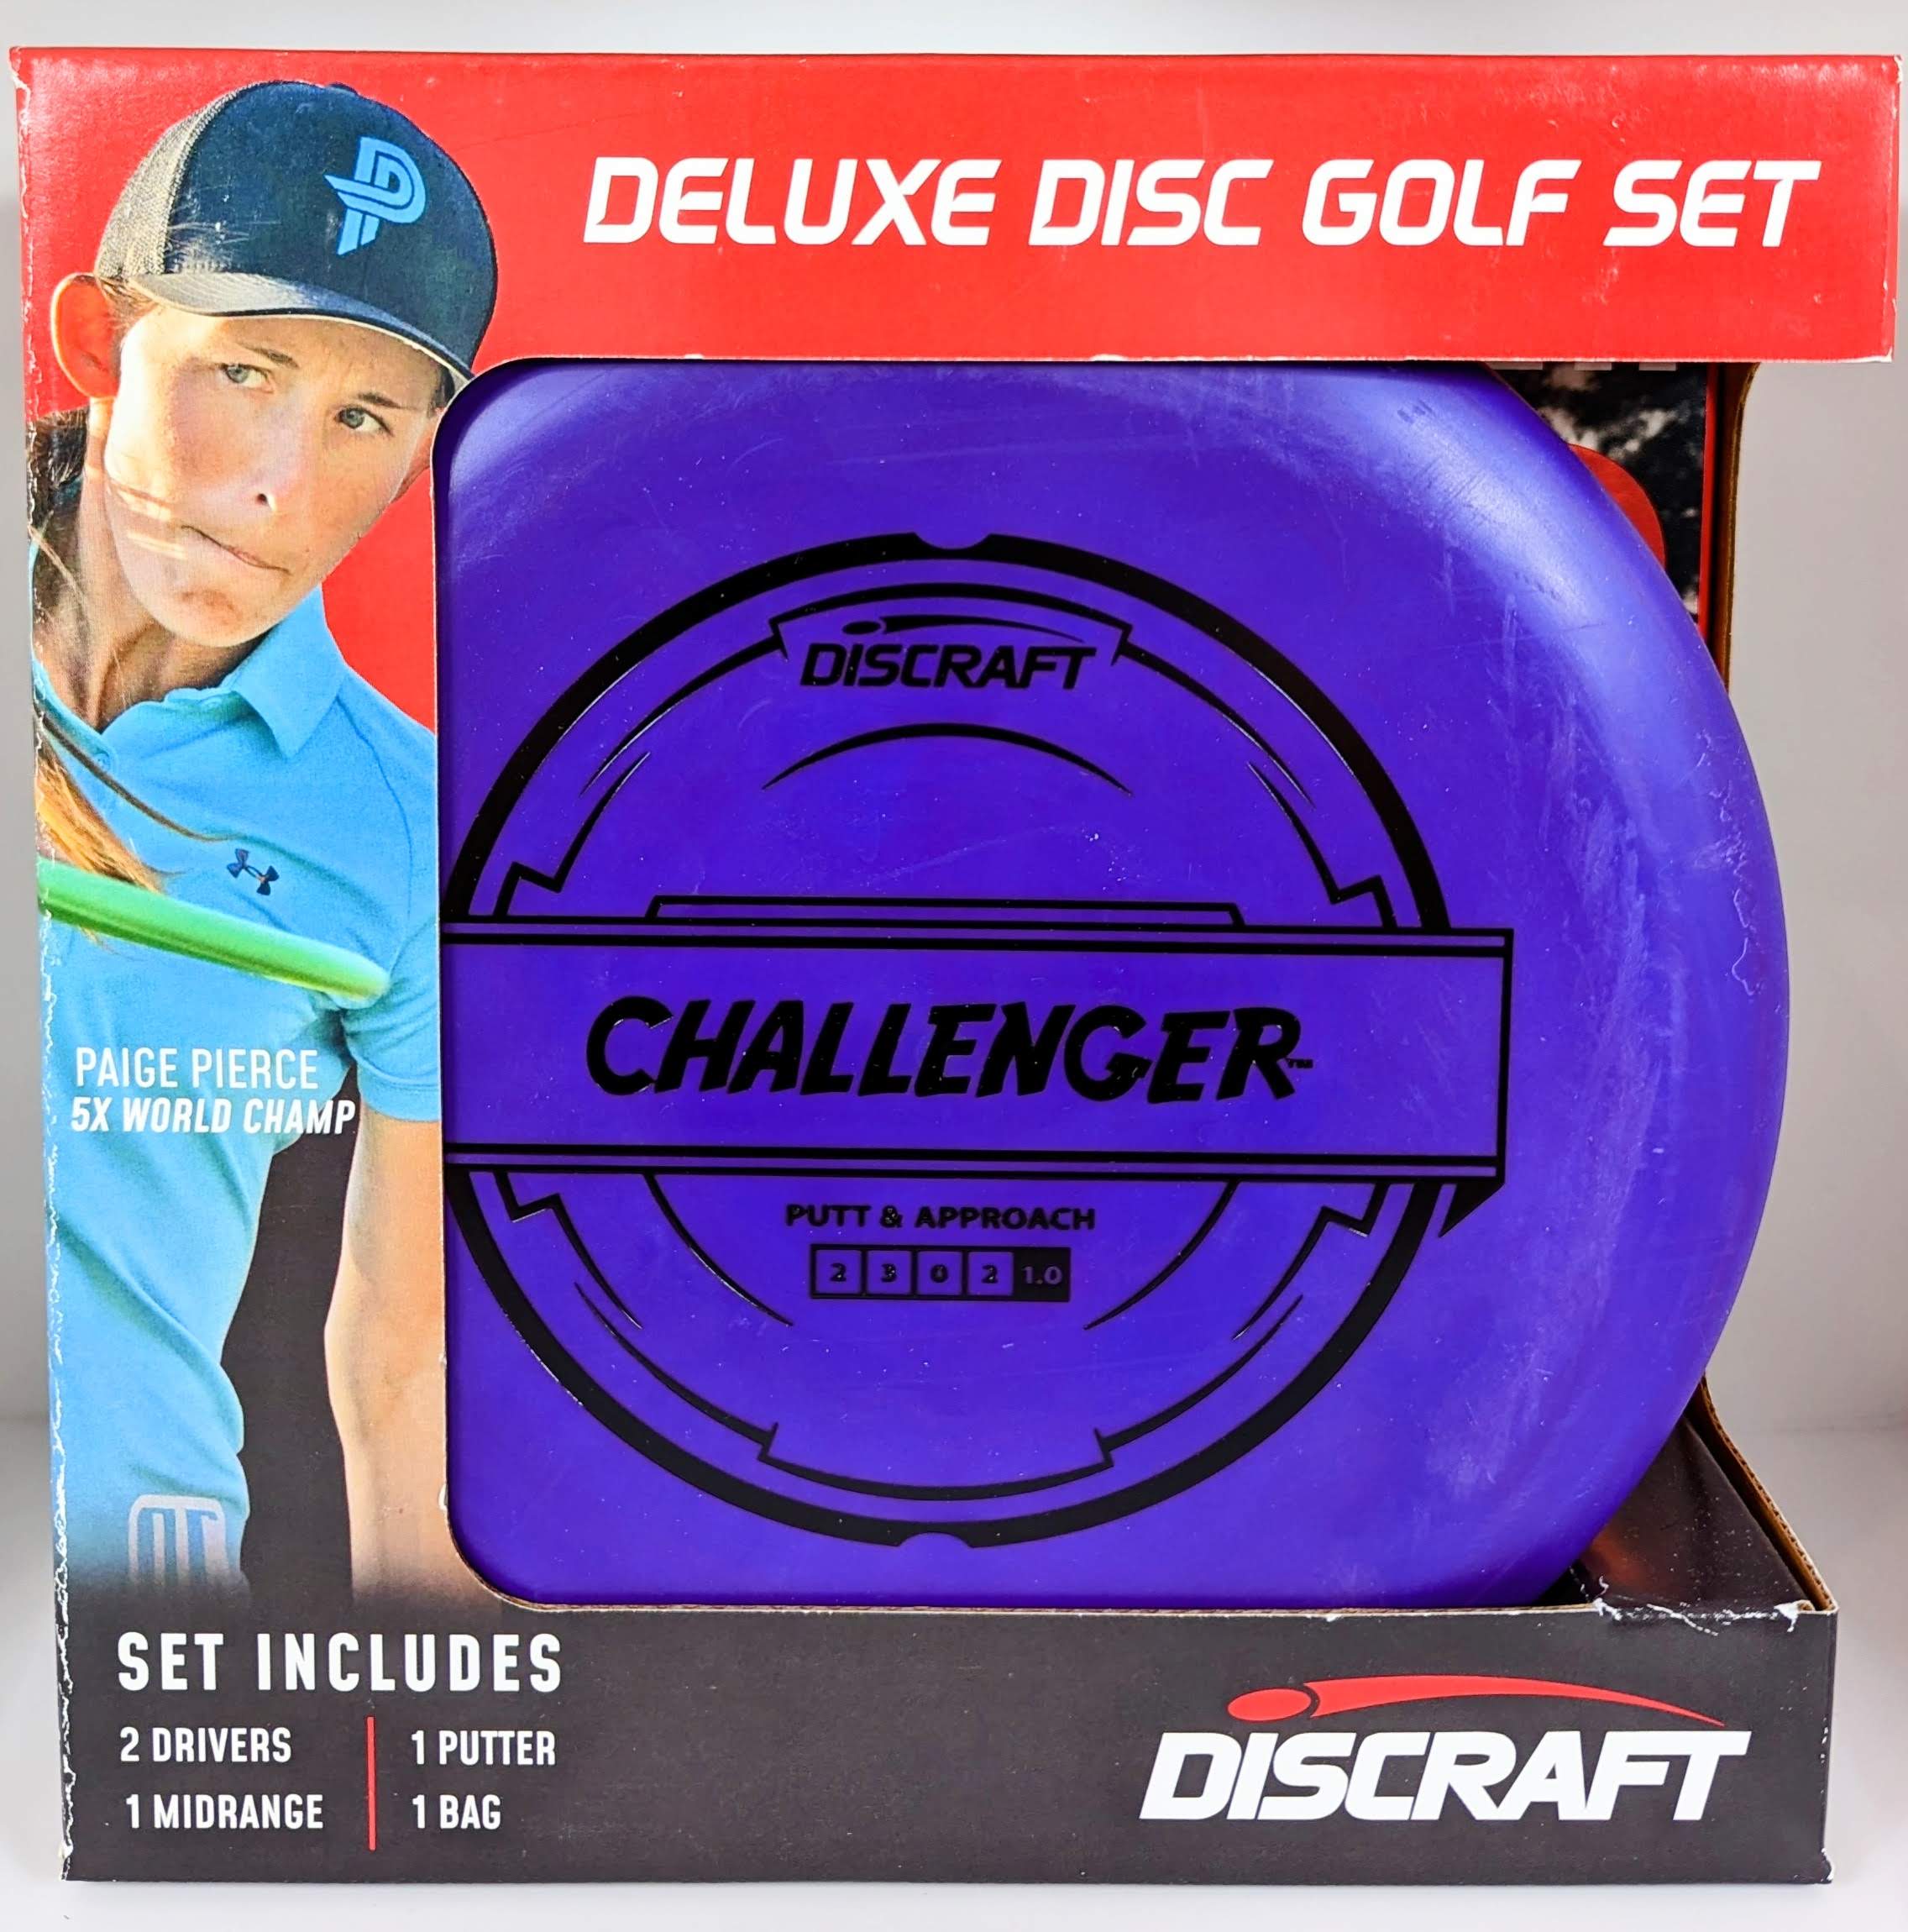 Discraft 4-Disc and Bag Deluxe Disc Golf Set